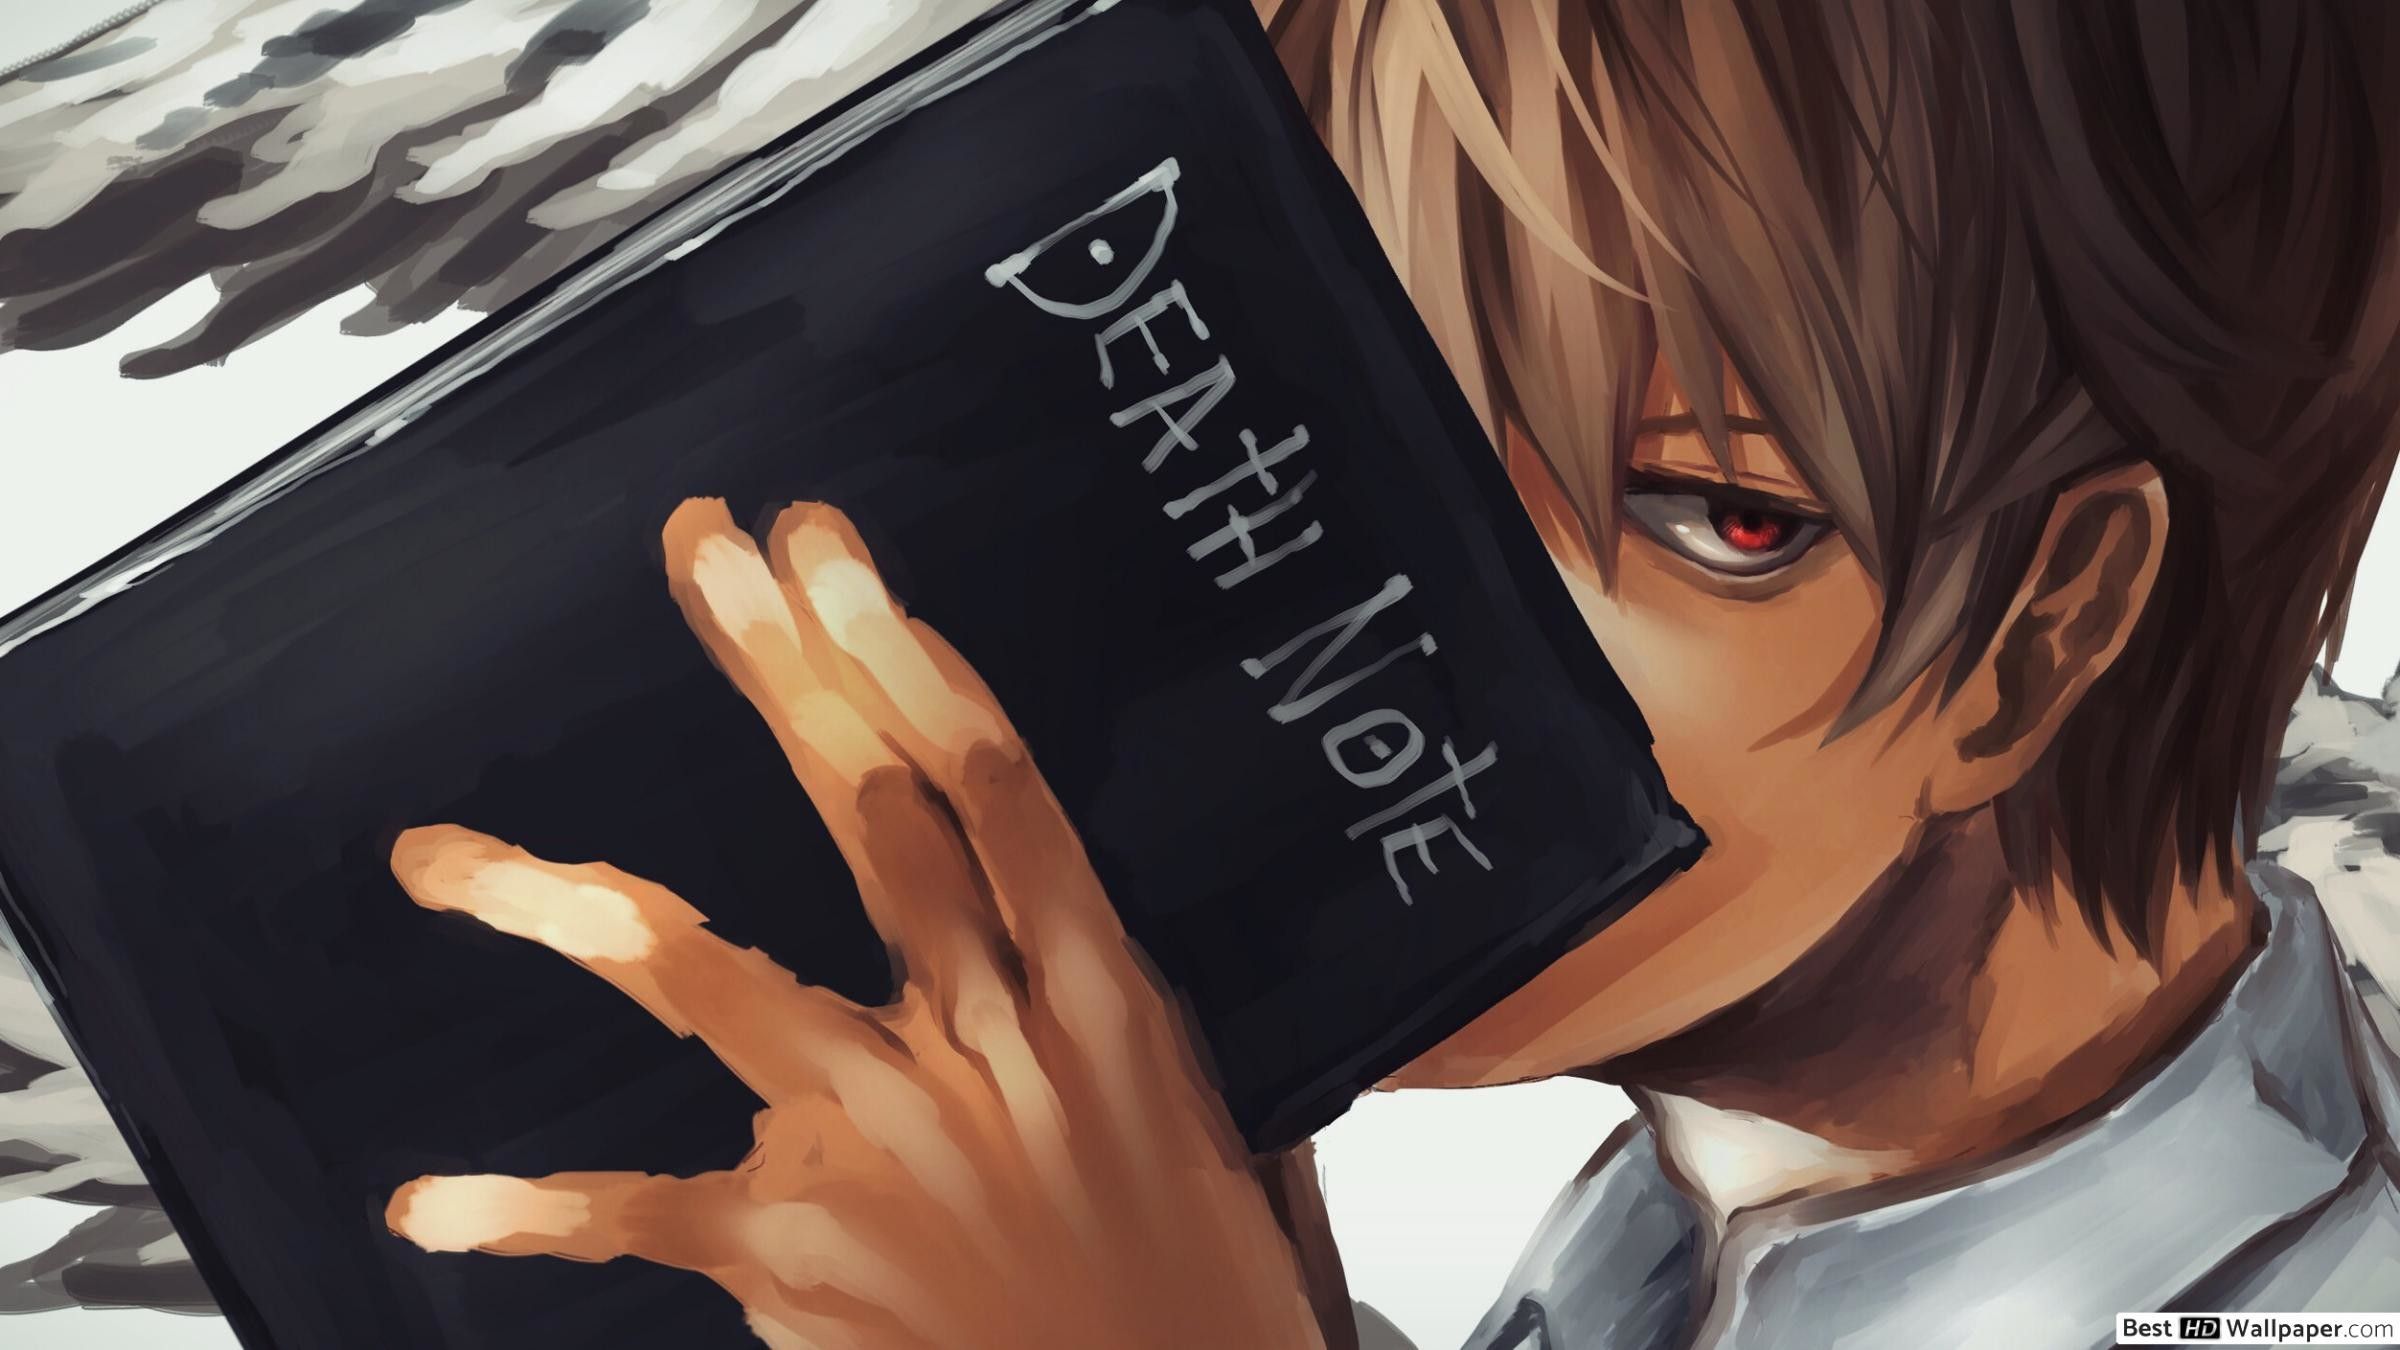 Death Note em 2020. Death note, Anime